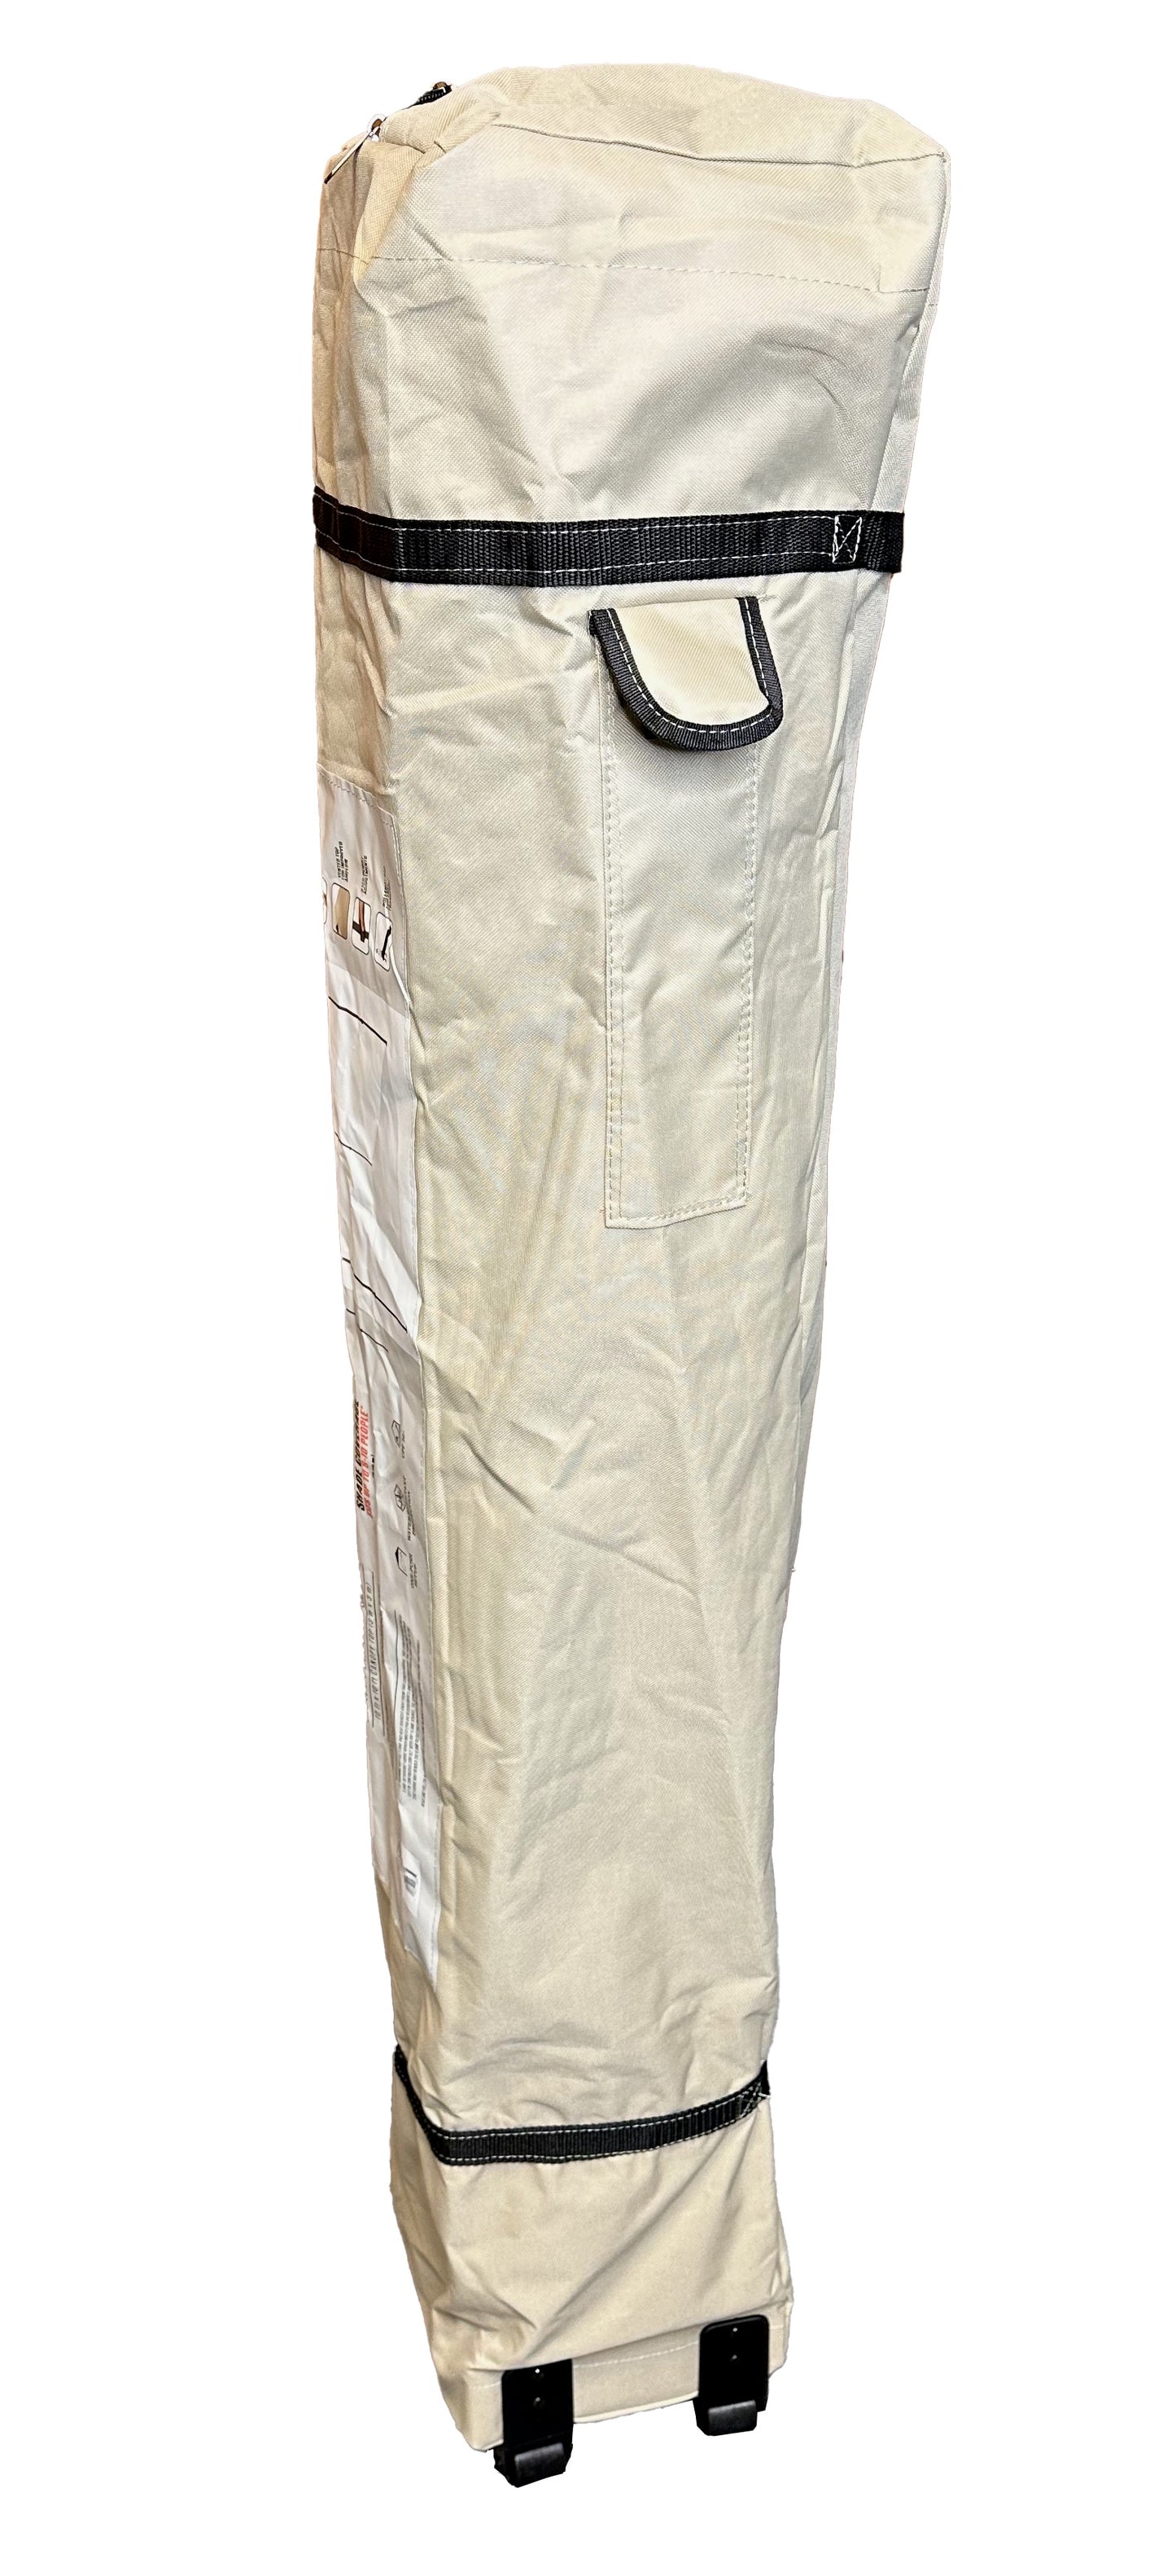 Carry Bag Wheeled 52" for Academy Sports + Outdoors 10 ft x 10 ft One Push Straight Leg Canopy Replacement Parts